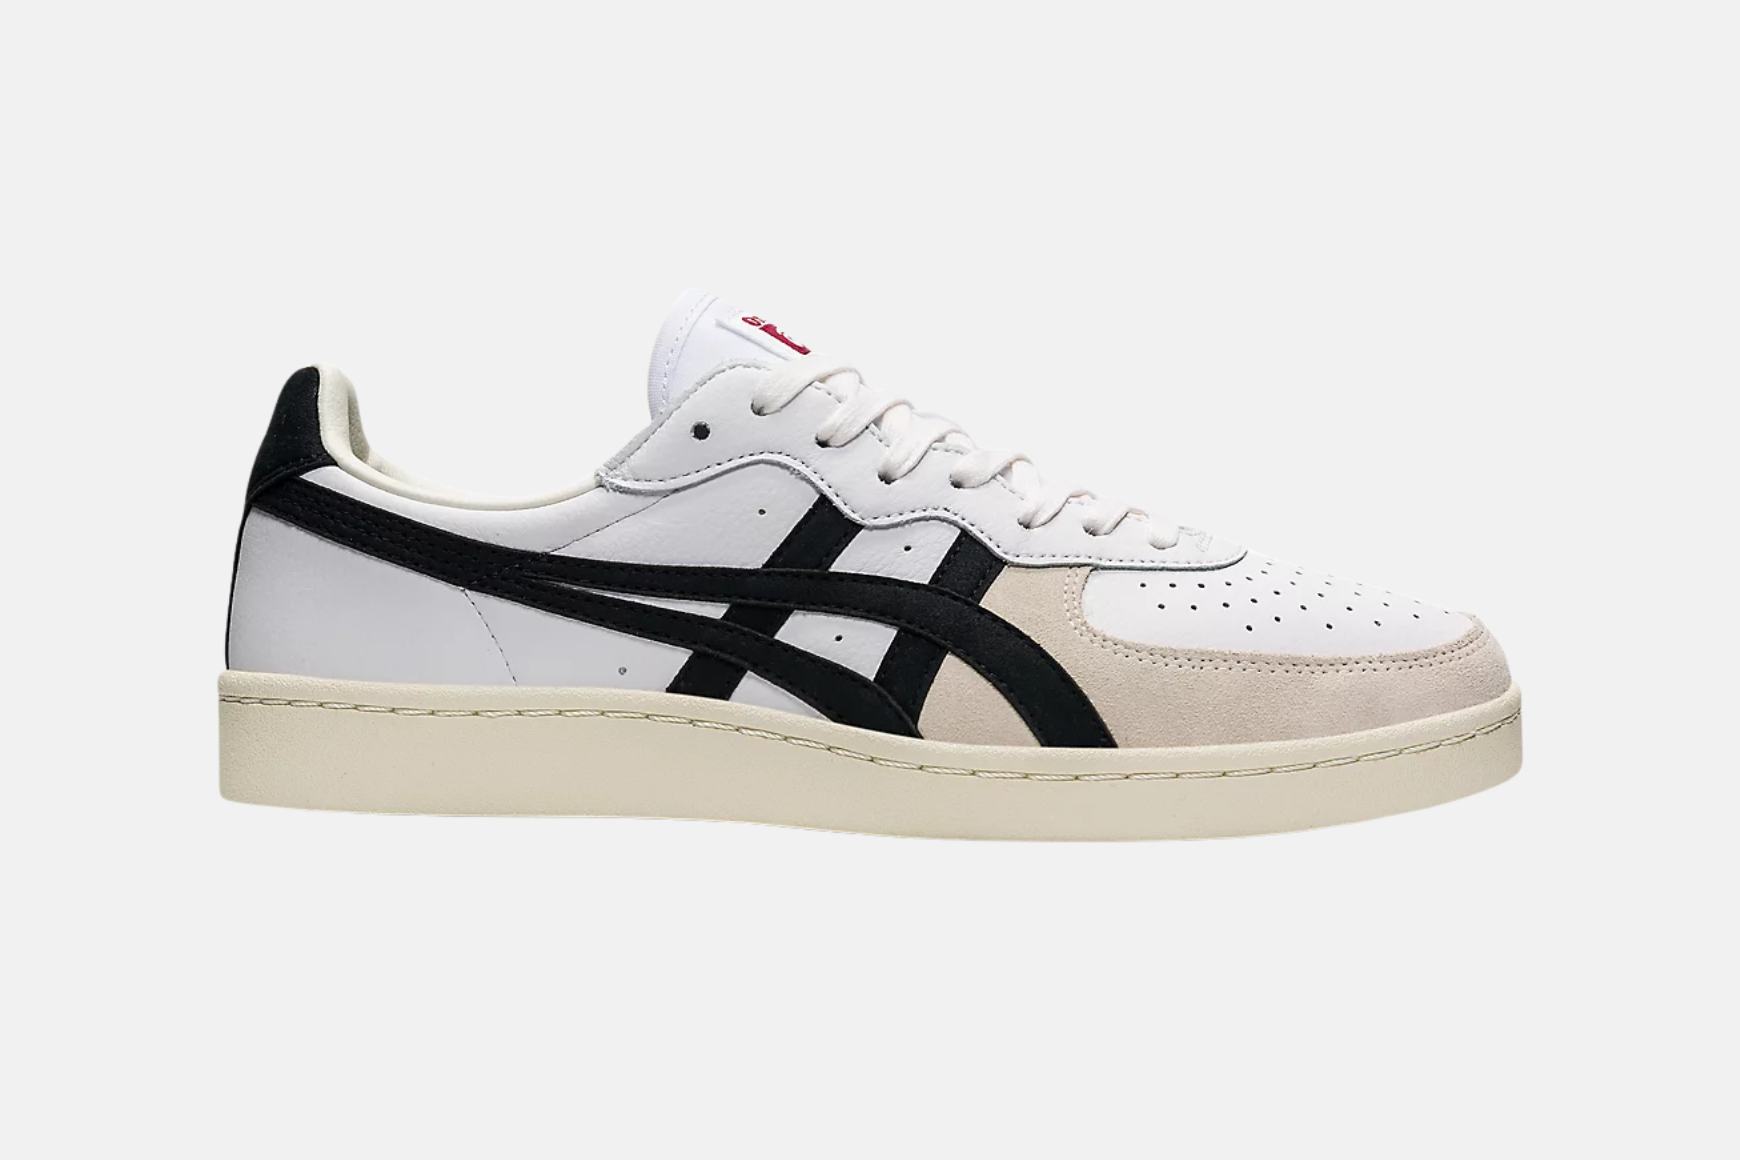 A single Onitsuka Tiger GSM sneaker in white